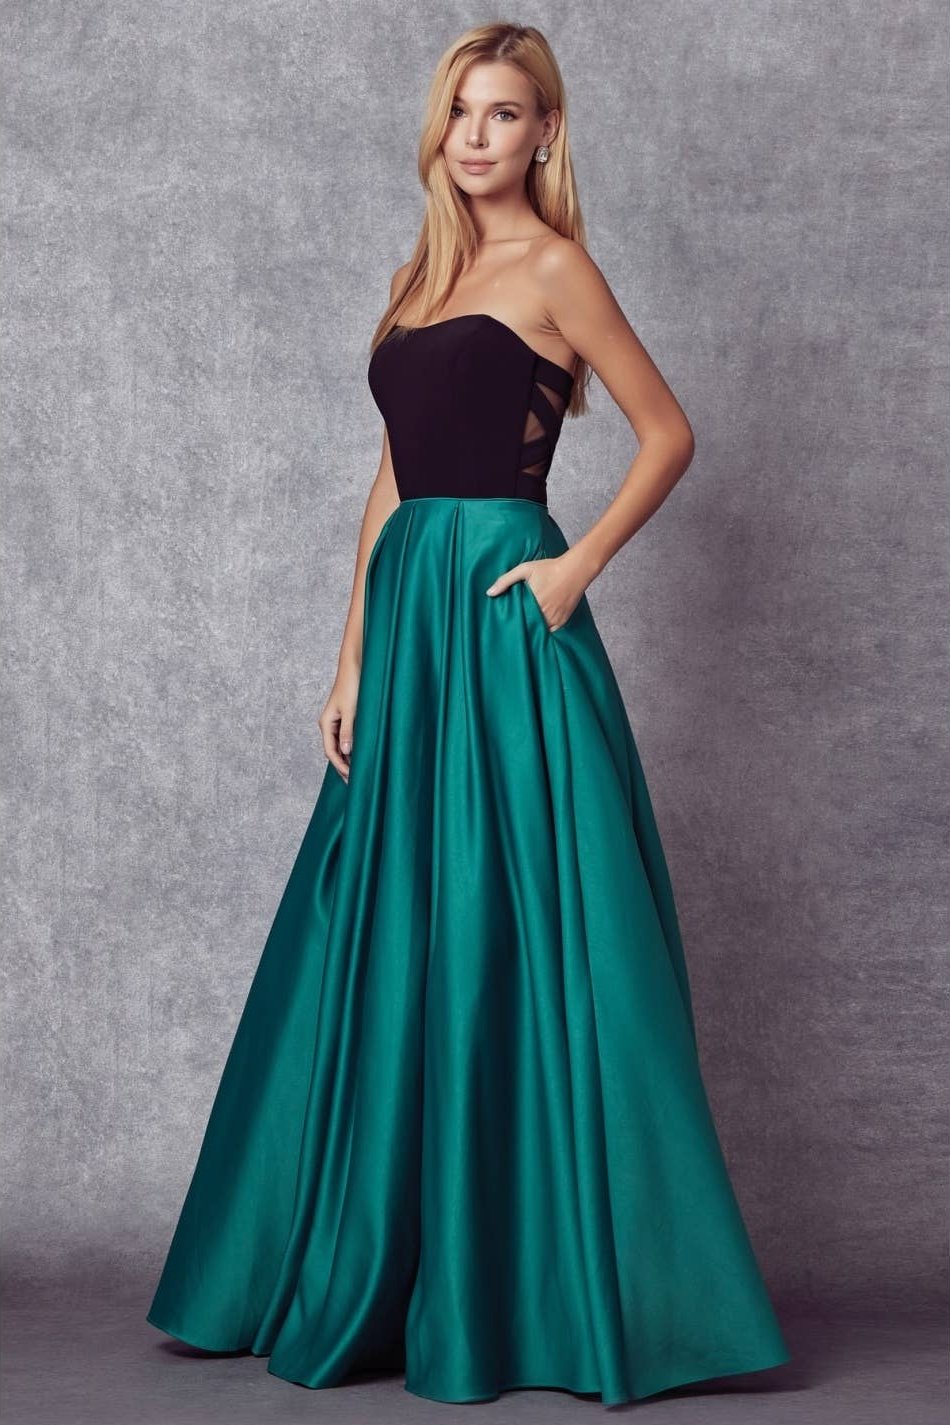 Two Tone Sweetheart Ball Gown Style Prom Dress